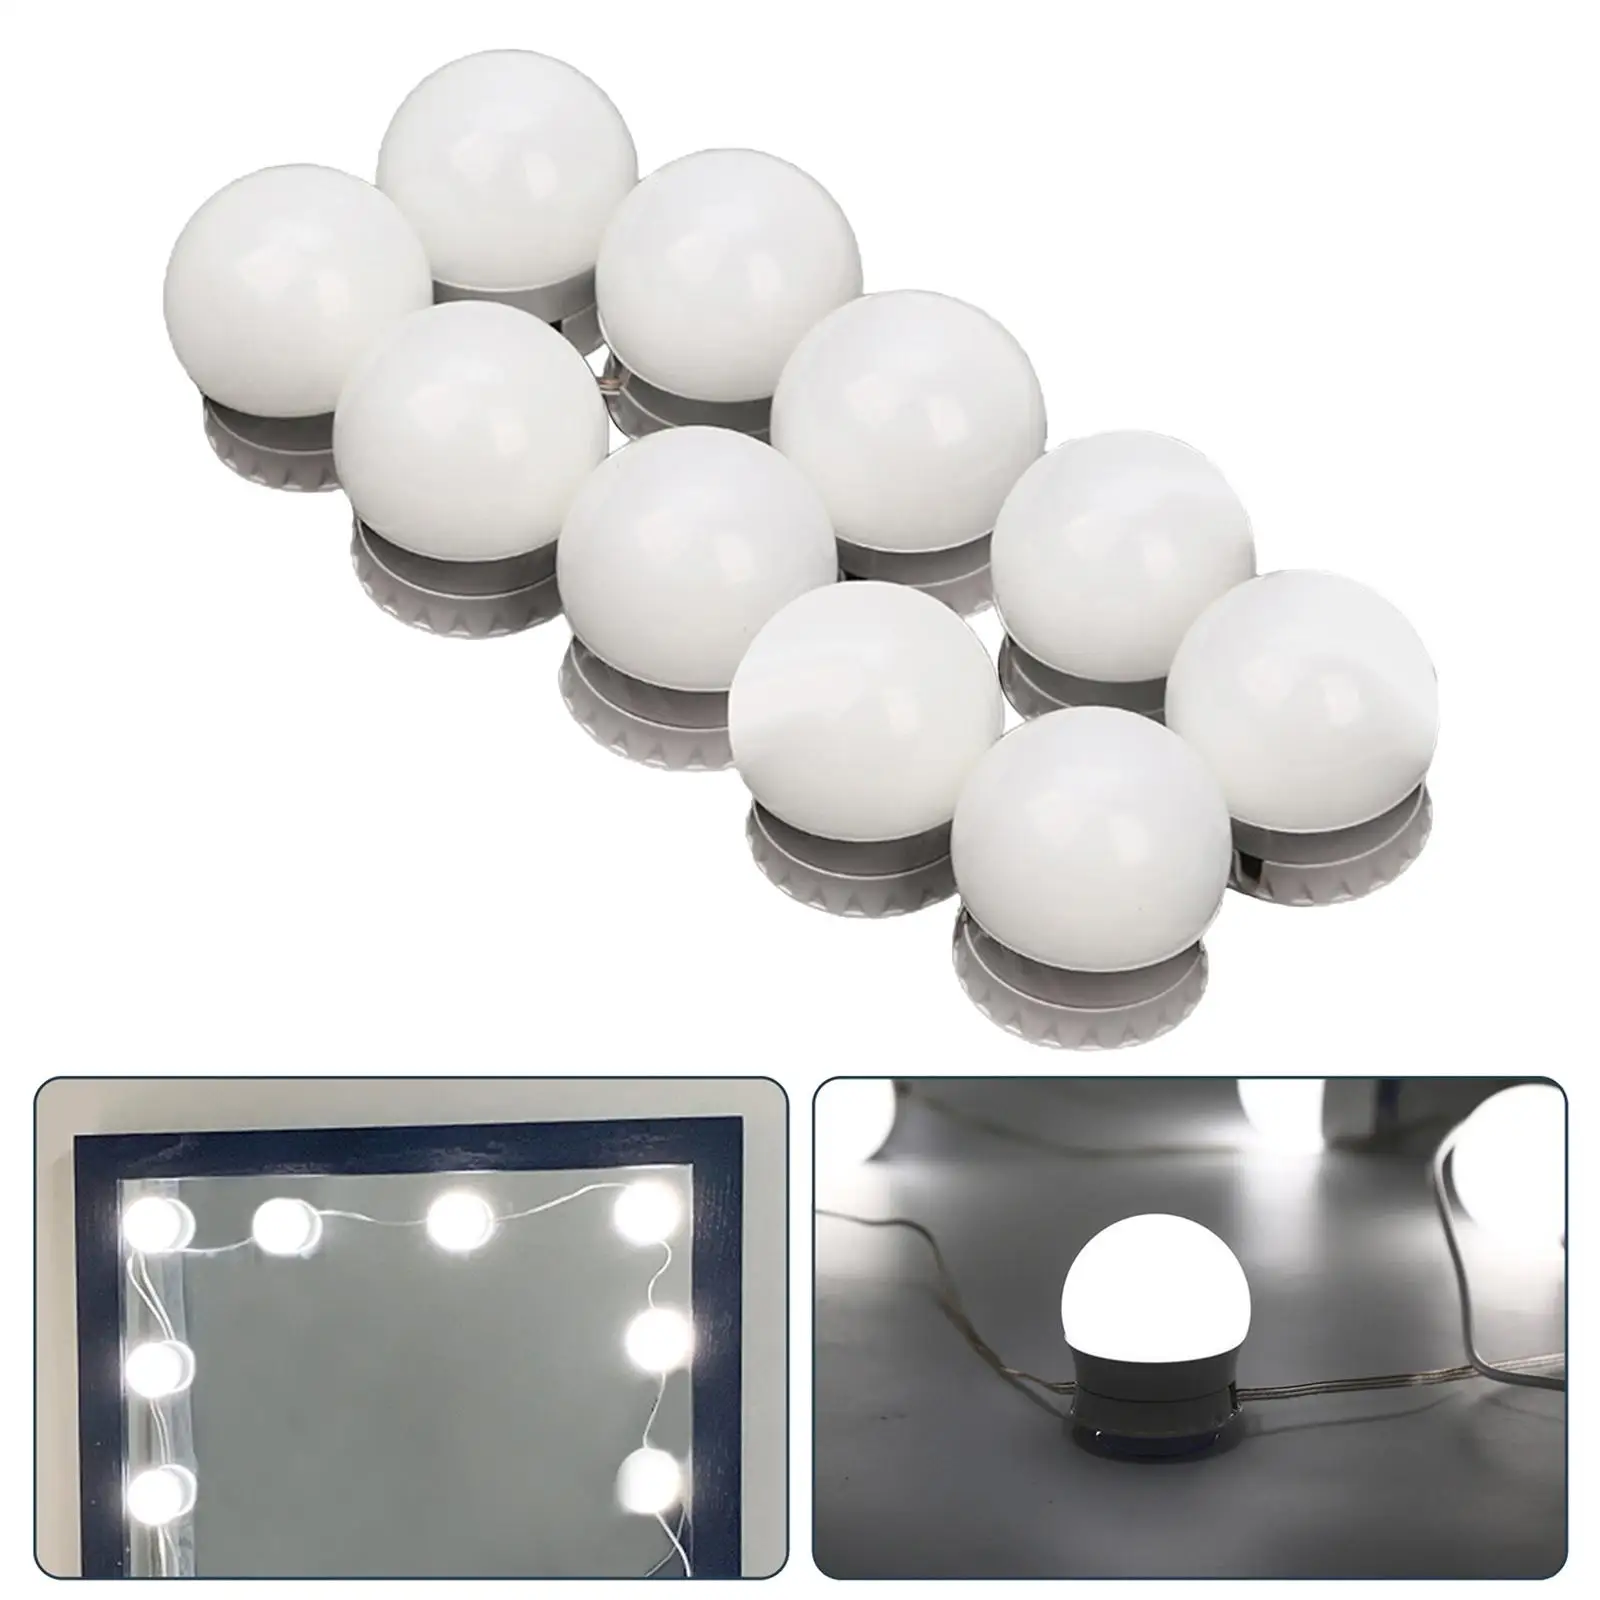 10 BulbLed Makeup Mirror Light Suction Cup Installation Dressing Table Vanity Light Bathroom Wall Lamp